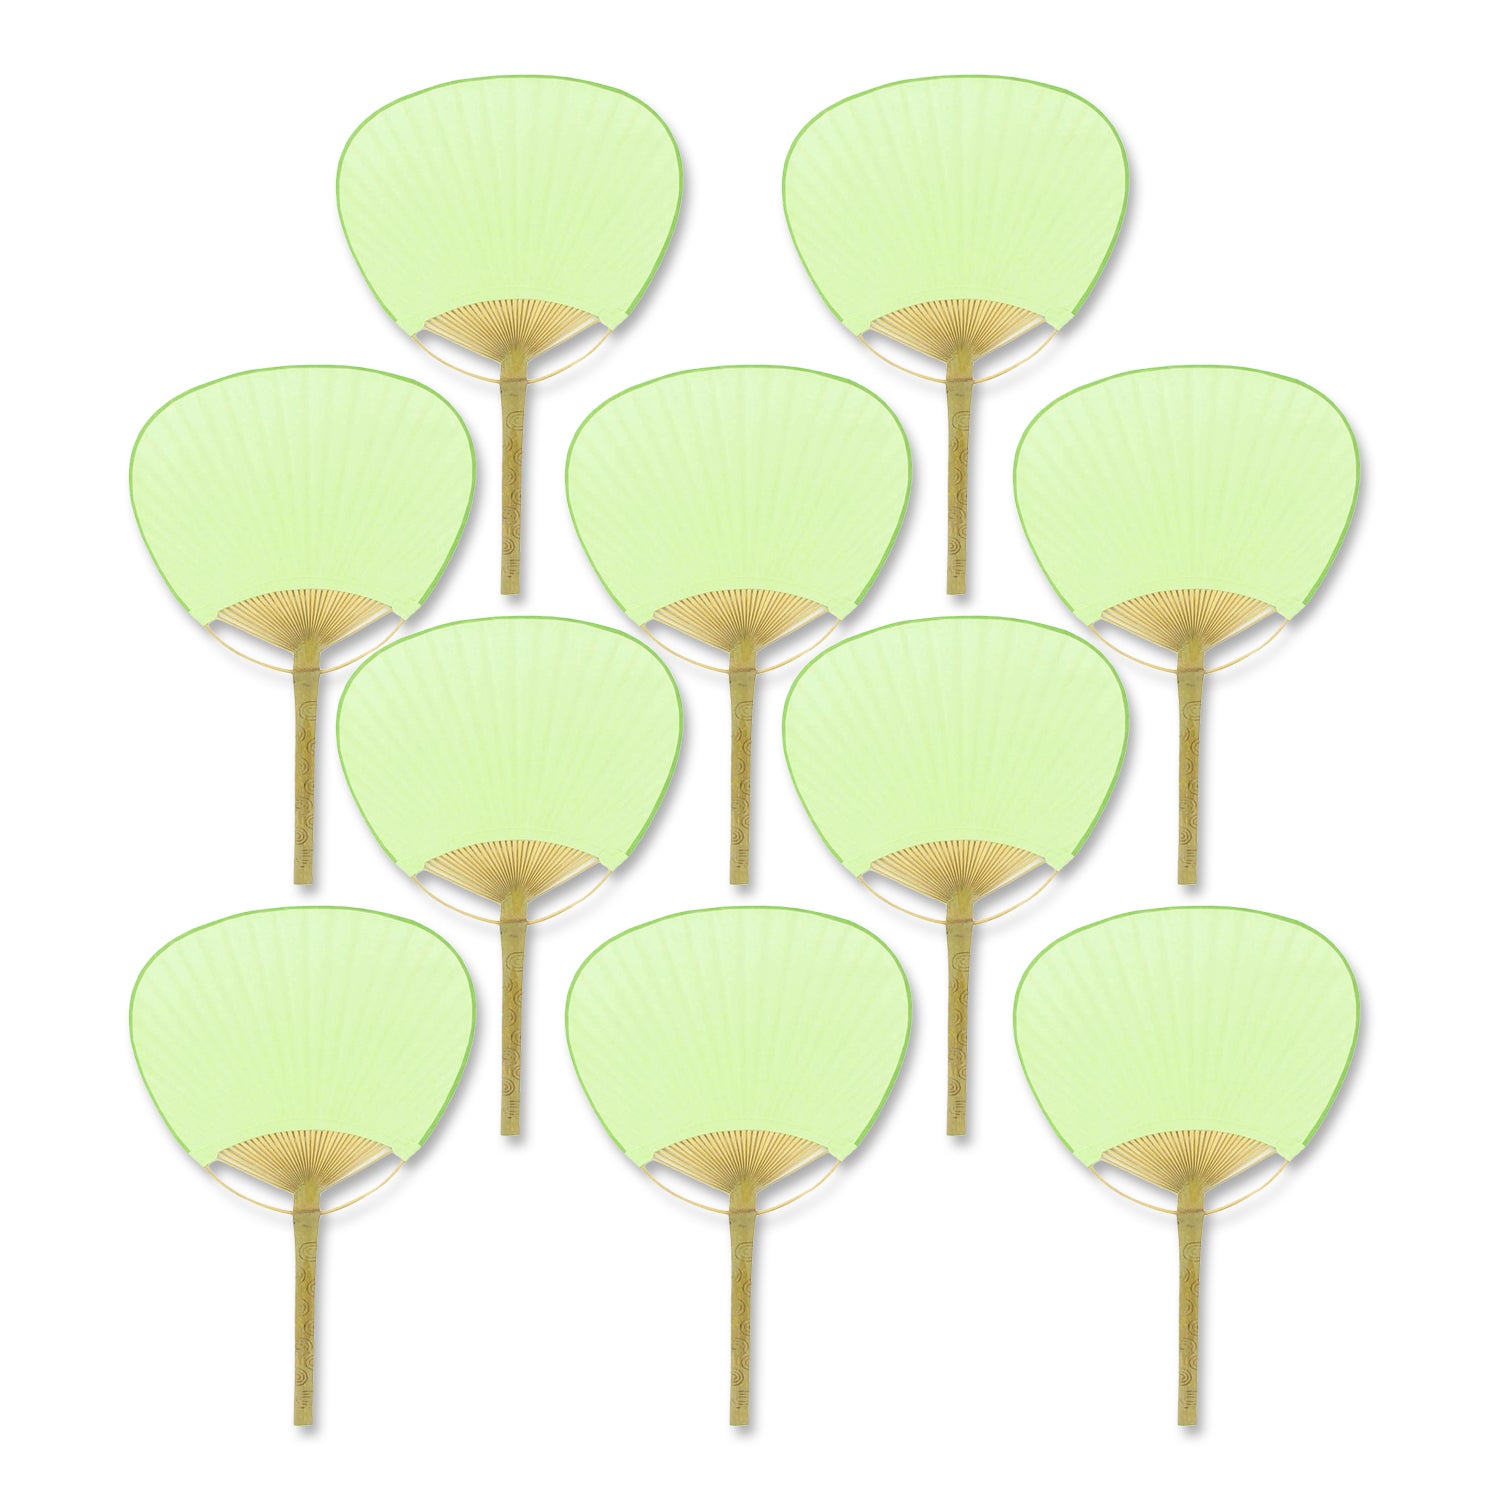  9" Light Lime Green Paddle Paper Hand Fans for Weddings (10 Pack)